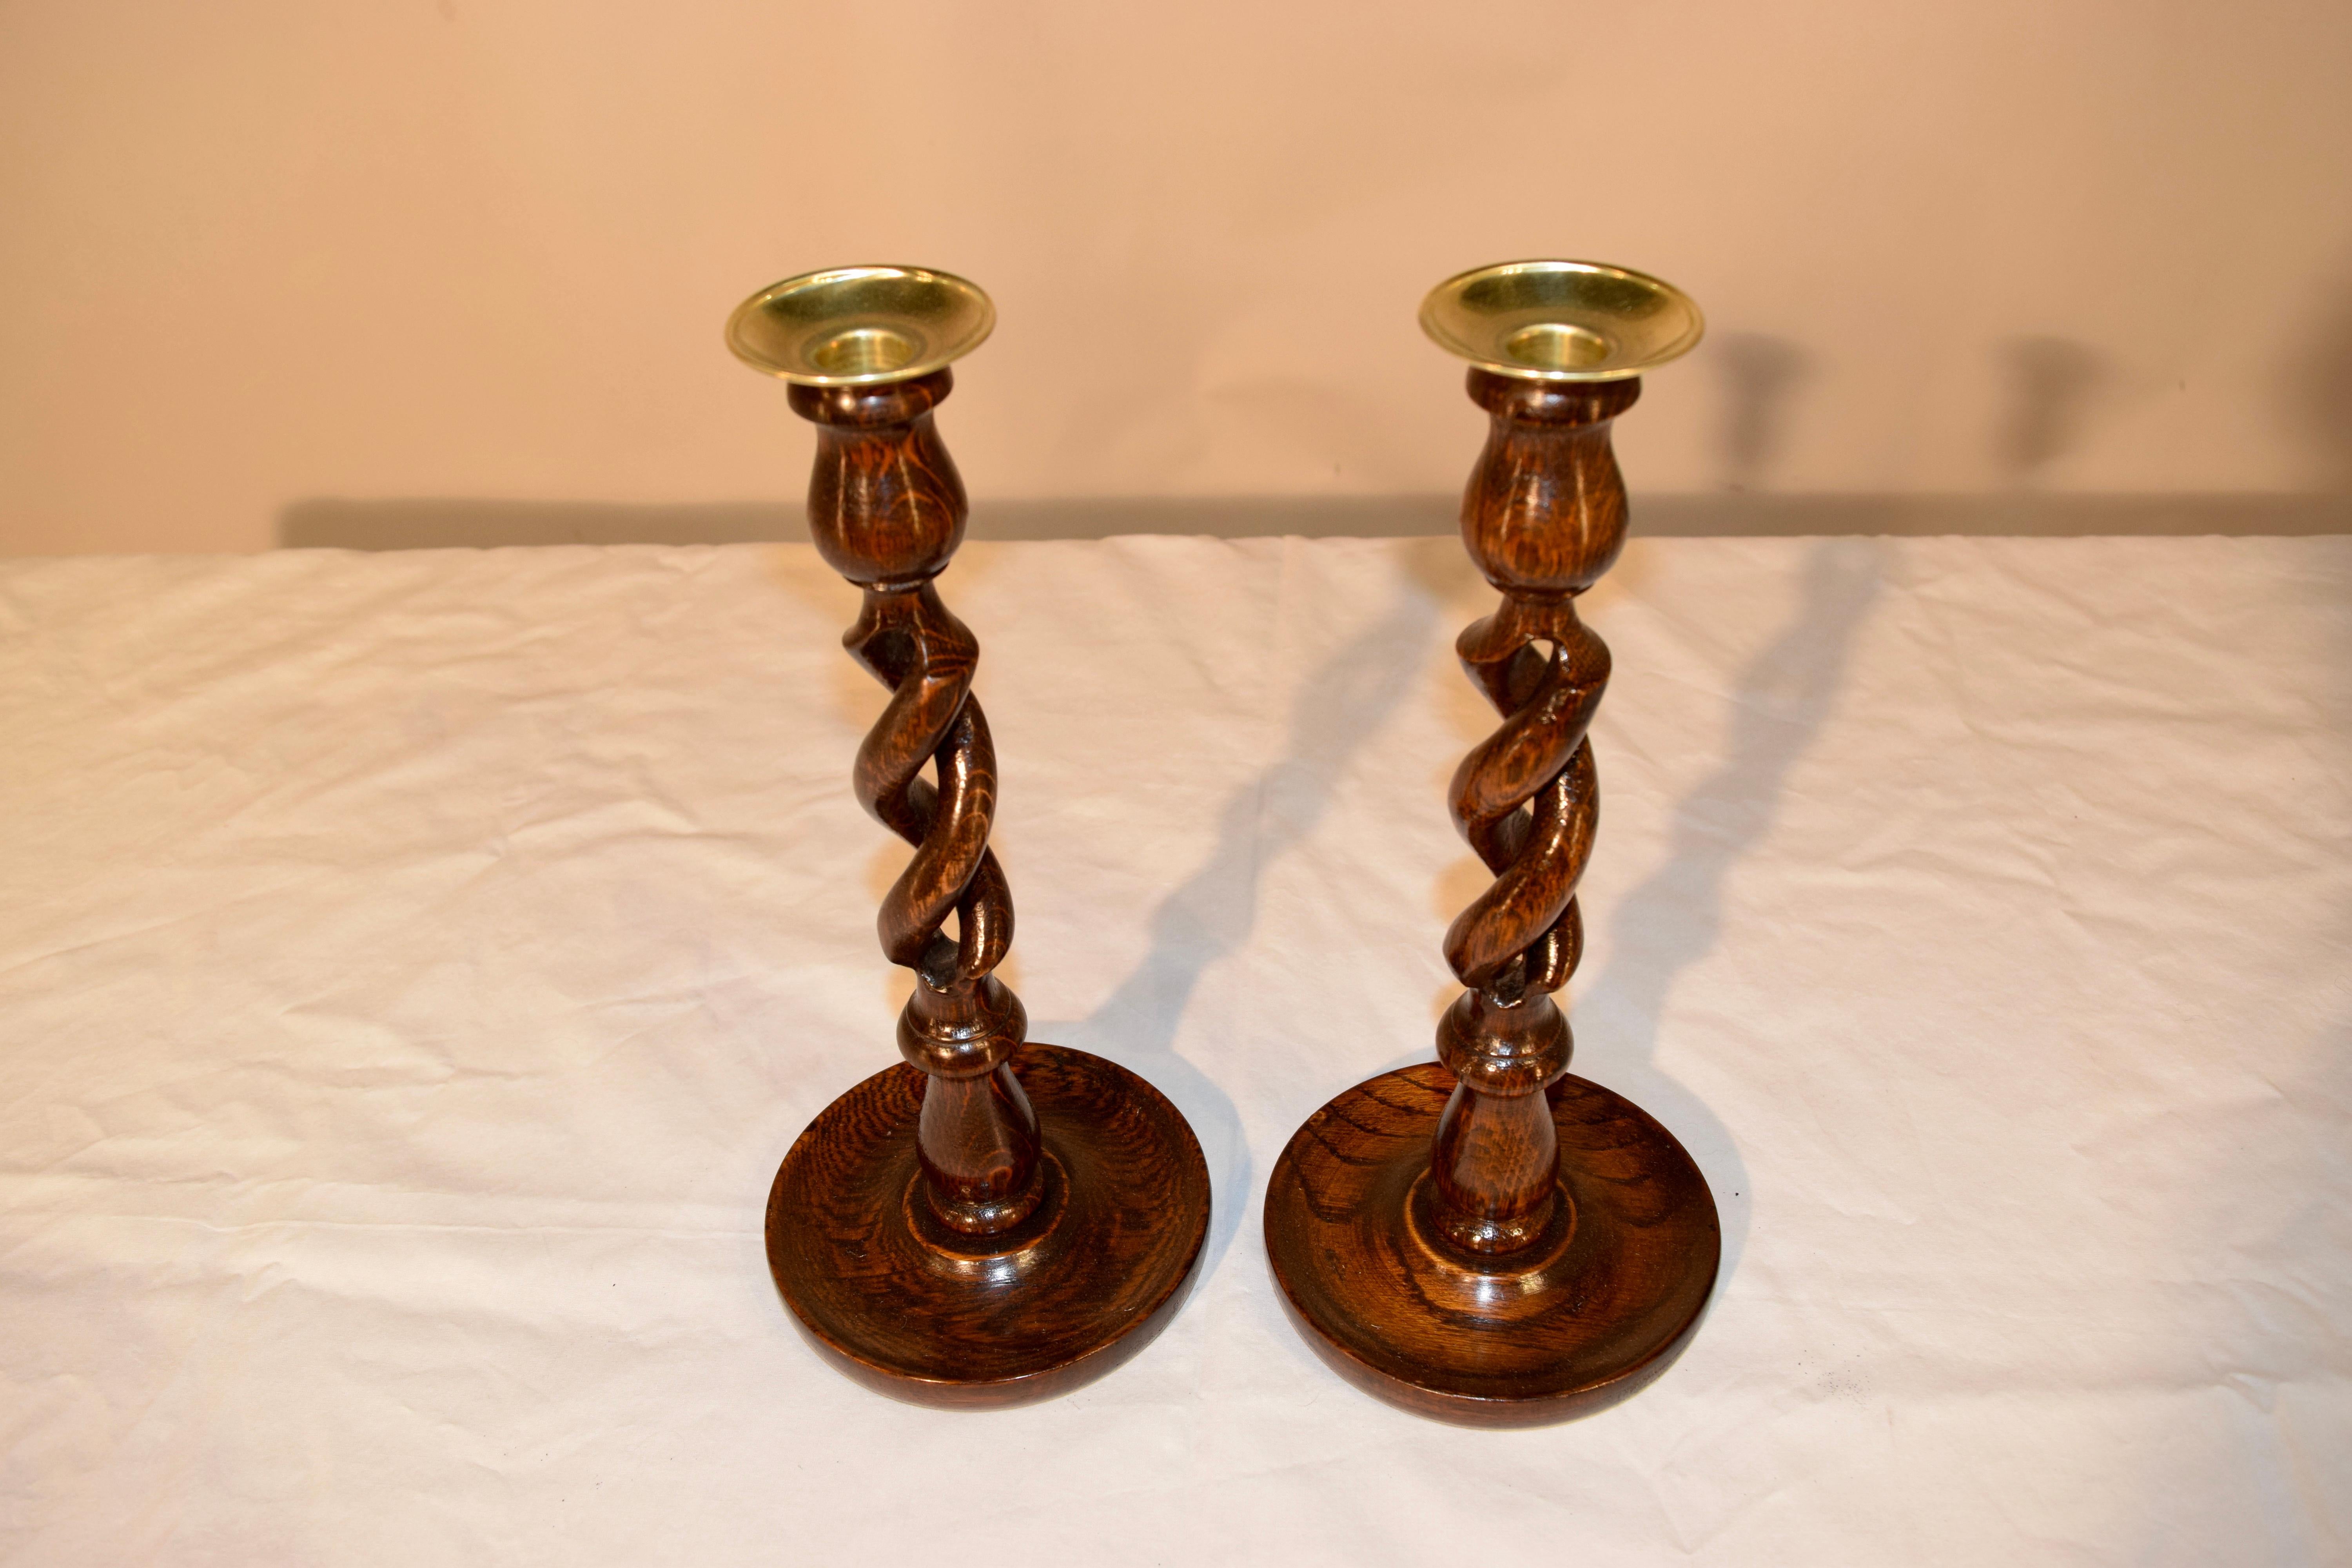 Pair of 19th century English oak candlesticks with open barley twist stems resting on hand-turned dish shaped bases and topped with hand cast brass candle cups.